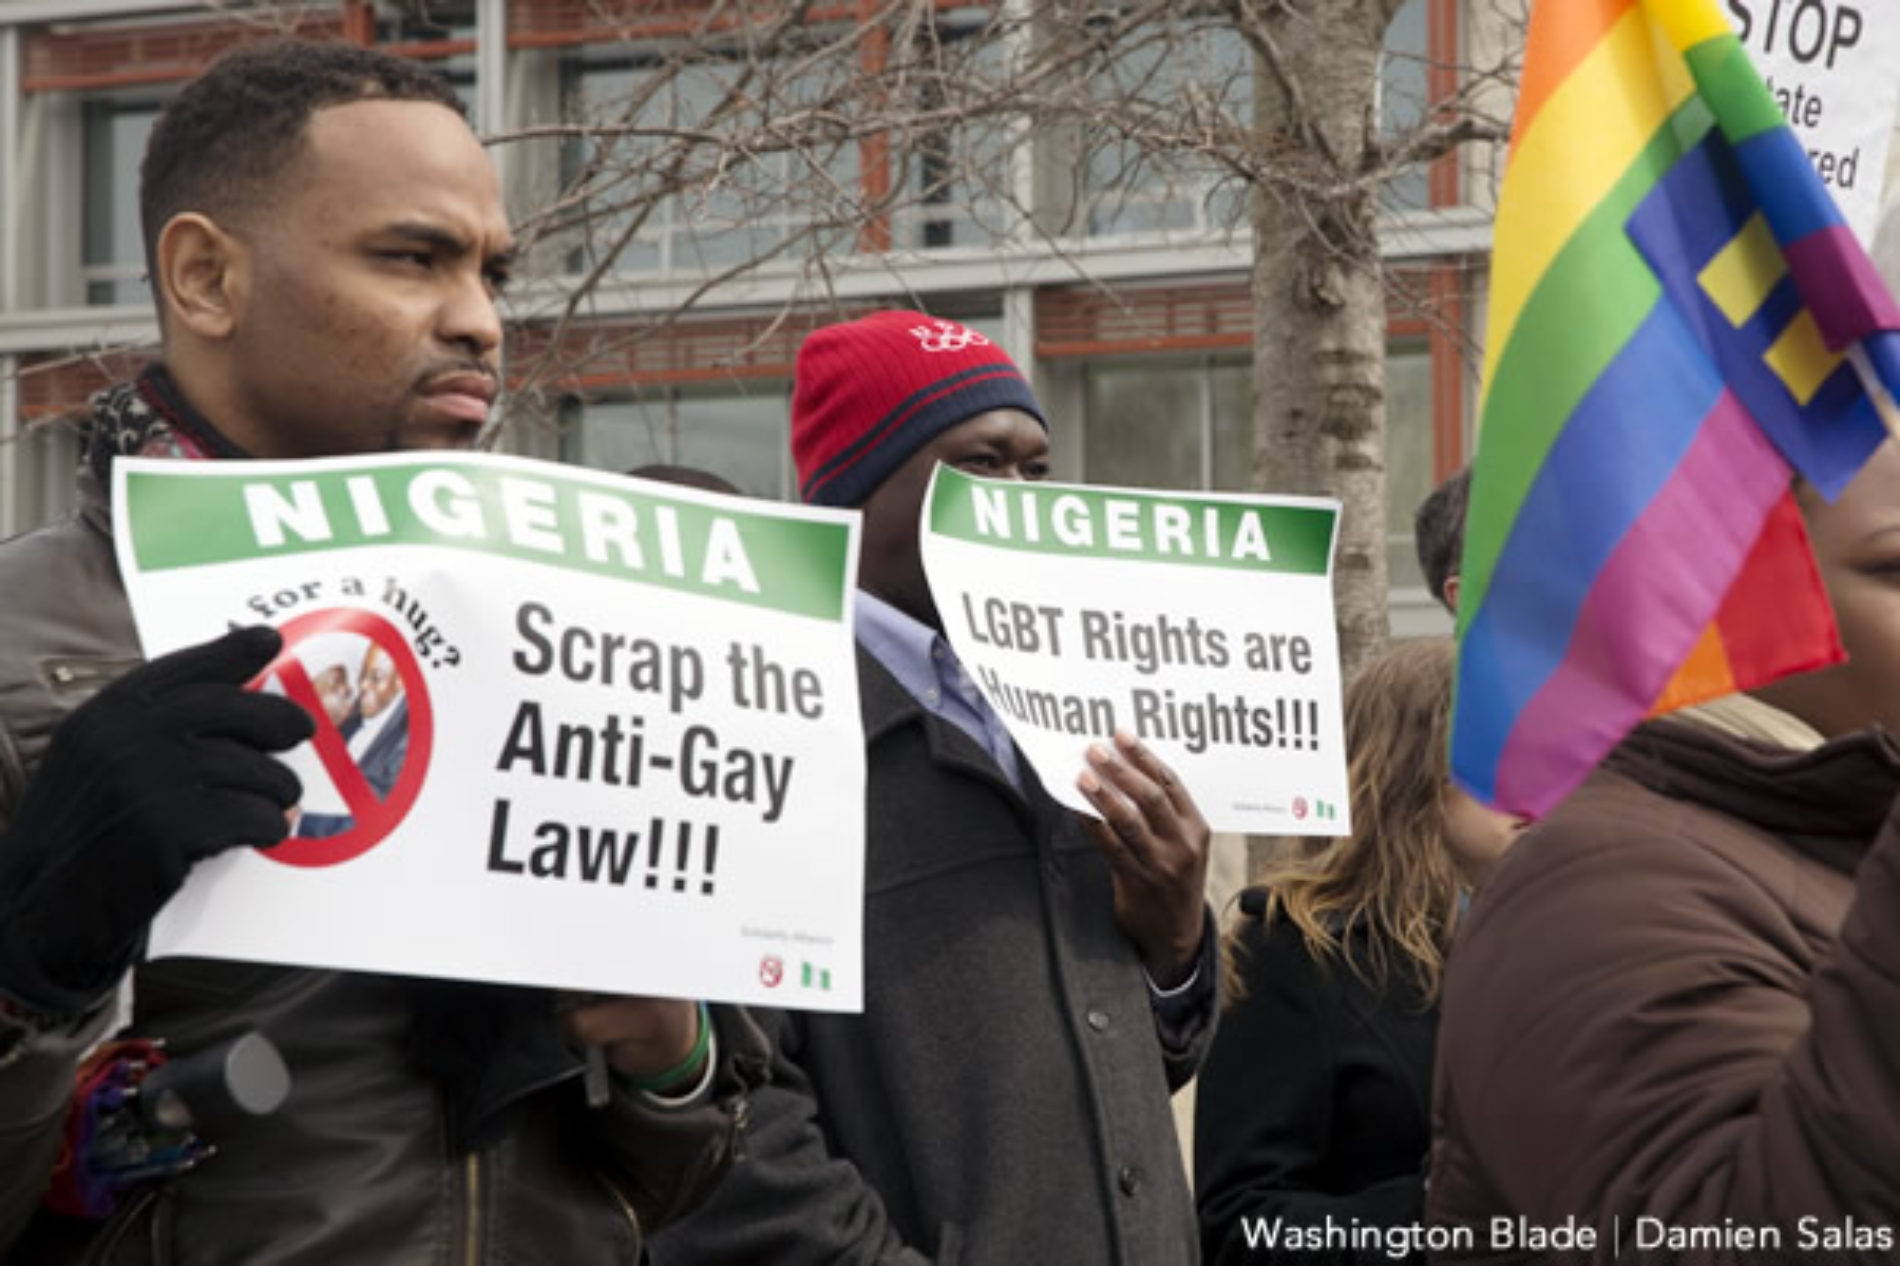 A SUMMARY OF THE ANTI-LGBT CRIMINAL LAWS OF NIGERIA